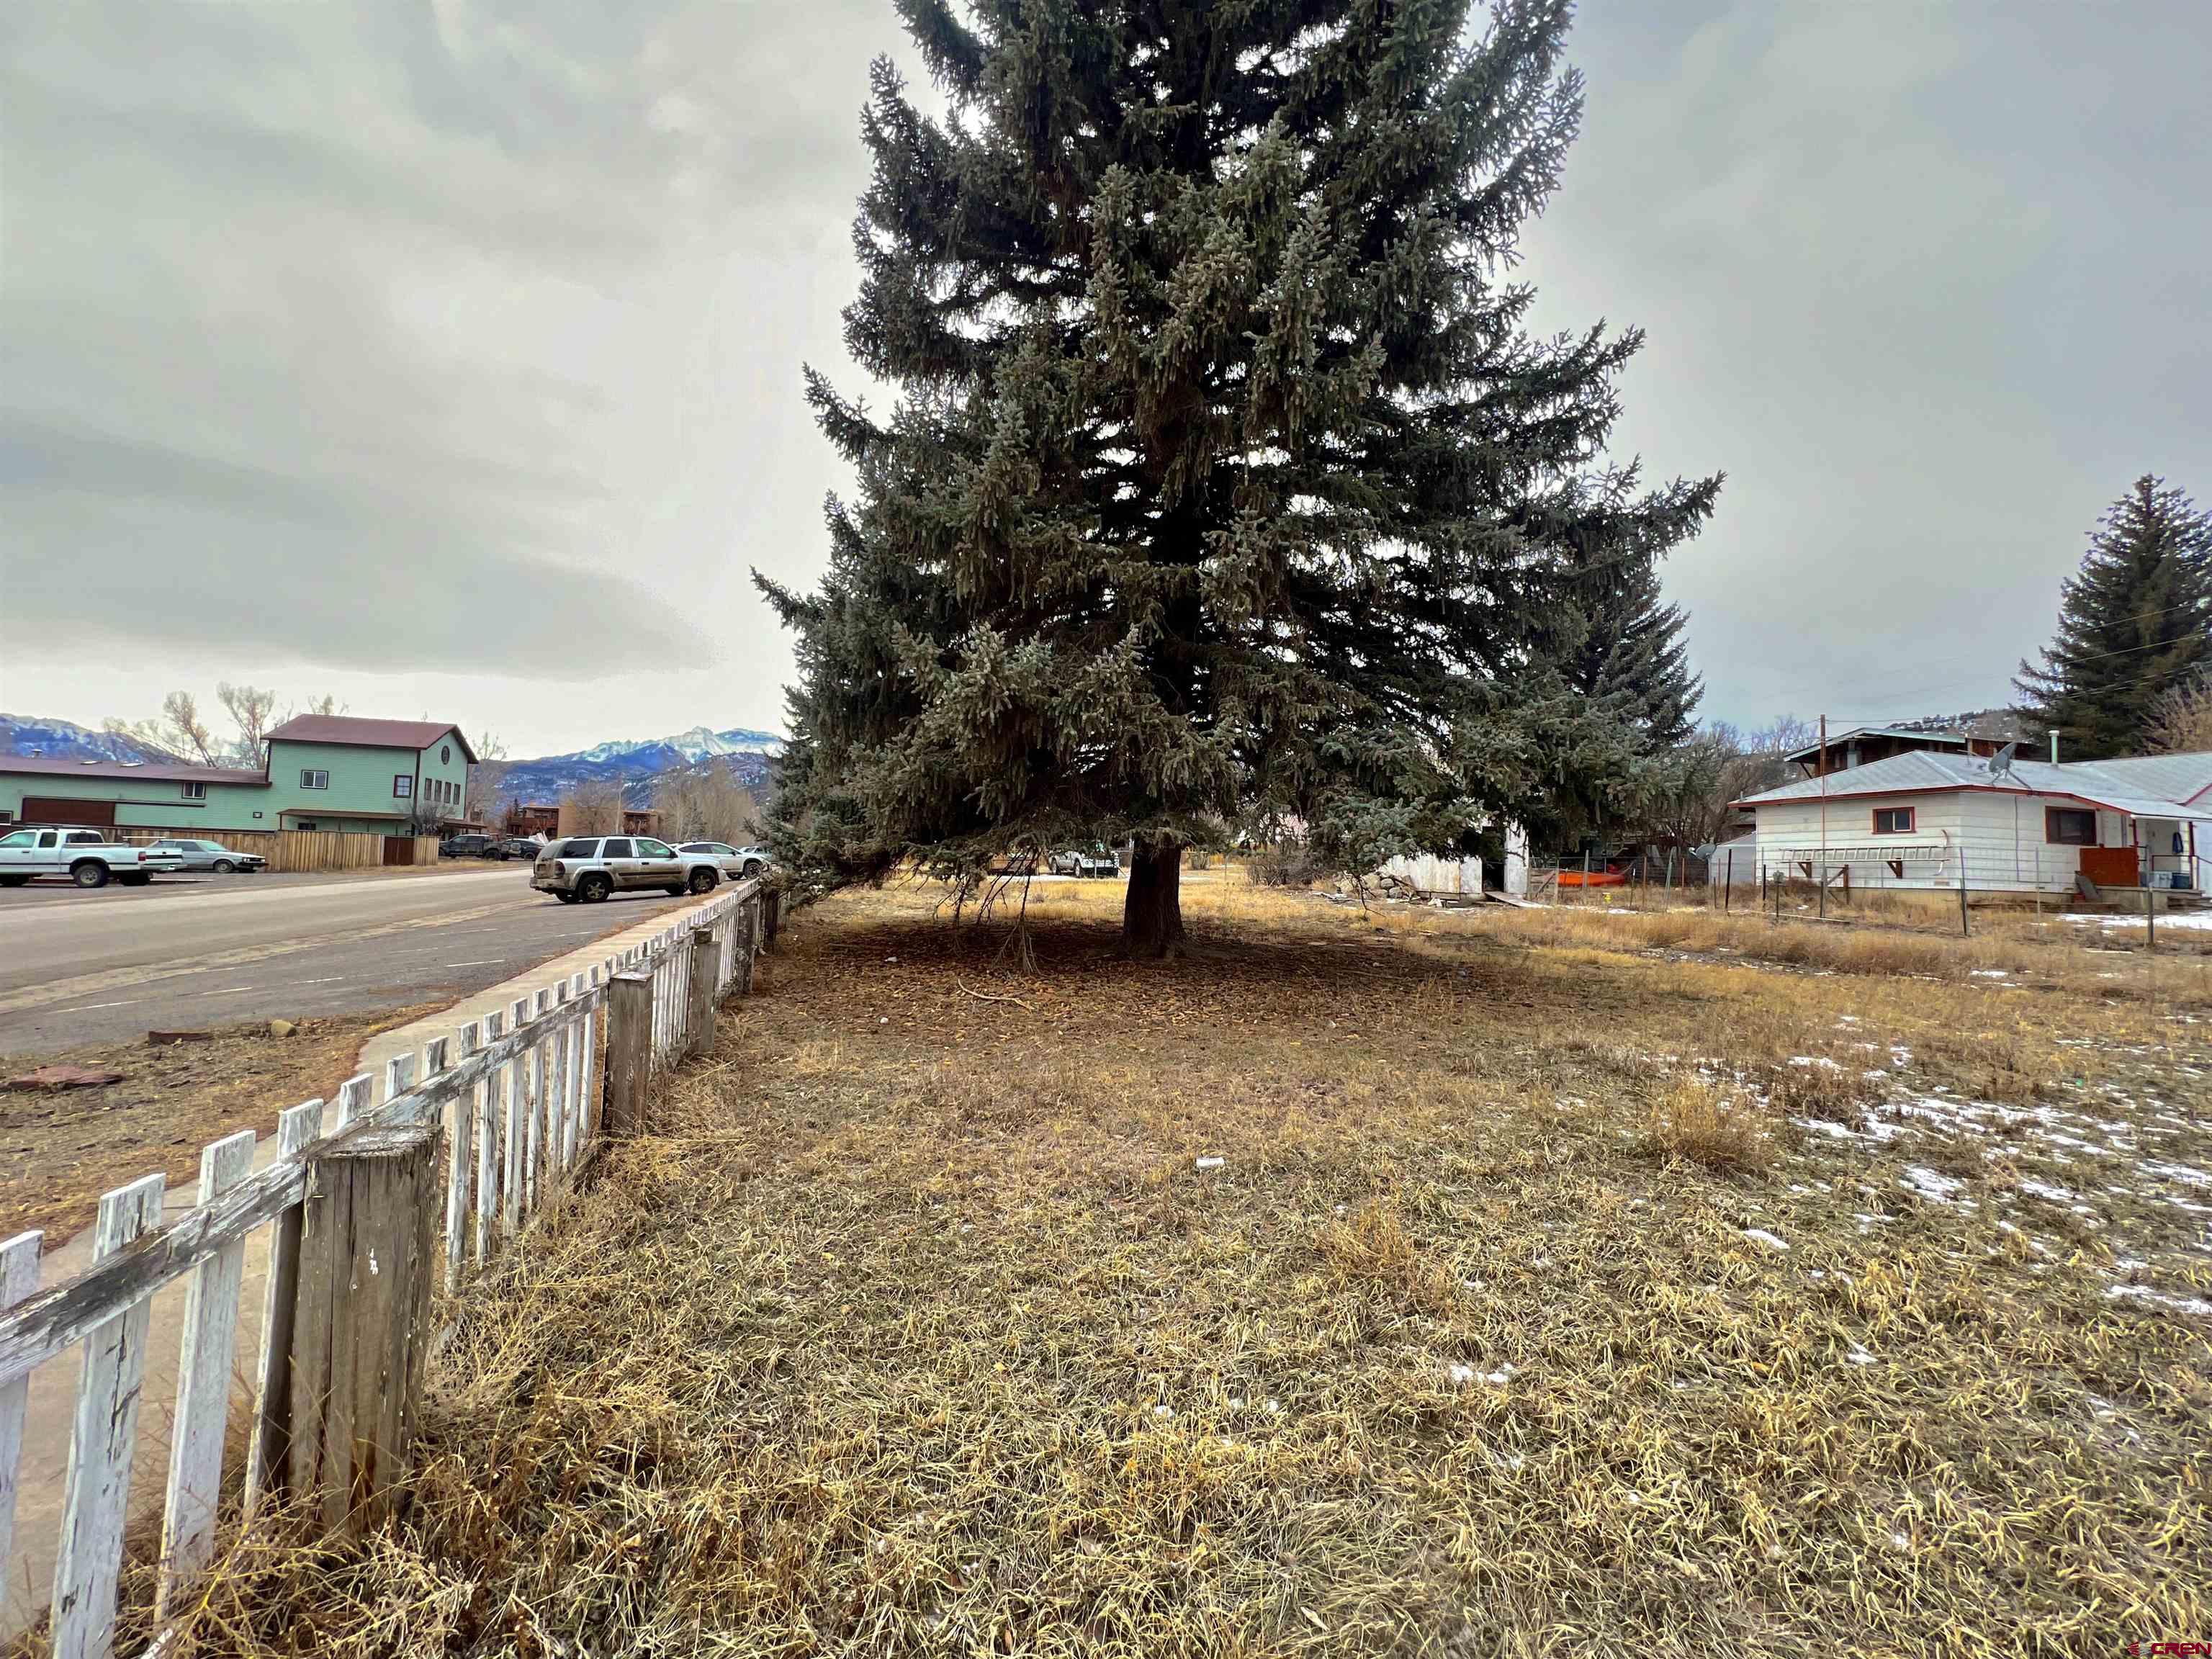 Location is key to this property located in downtown Ridgway! Four lots with current water/sewer taps. This property is priced to sell with the value in the land.  To own this and develop this prime location parcel with Historic Business zoning is truly a amazing opportunity. Would be great for multi-housing units, commercial, retail shops, business offices, service establishments, depots, clubs, theatres, restaurants, hotel, churches, and arts & craft studios! Ridgway is a quickly growing community. Gateway to Telluiride, Ouray and the Colorado Lifestyle.